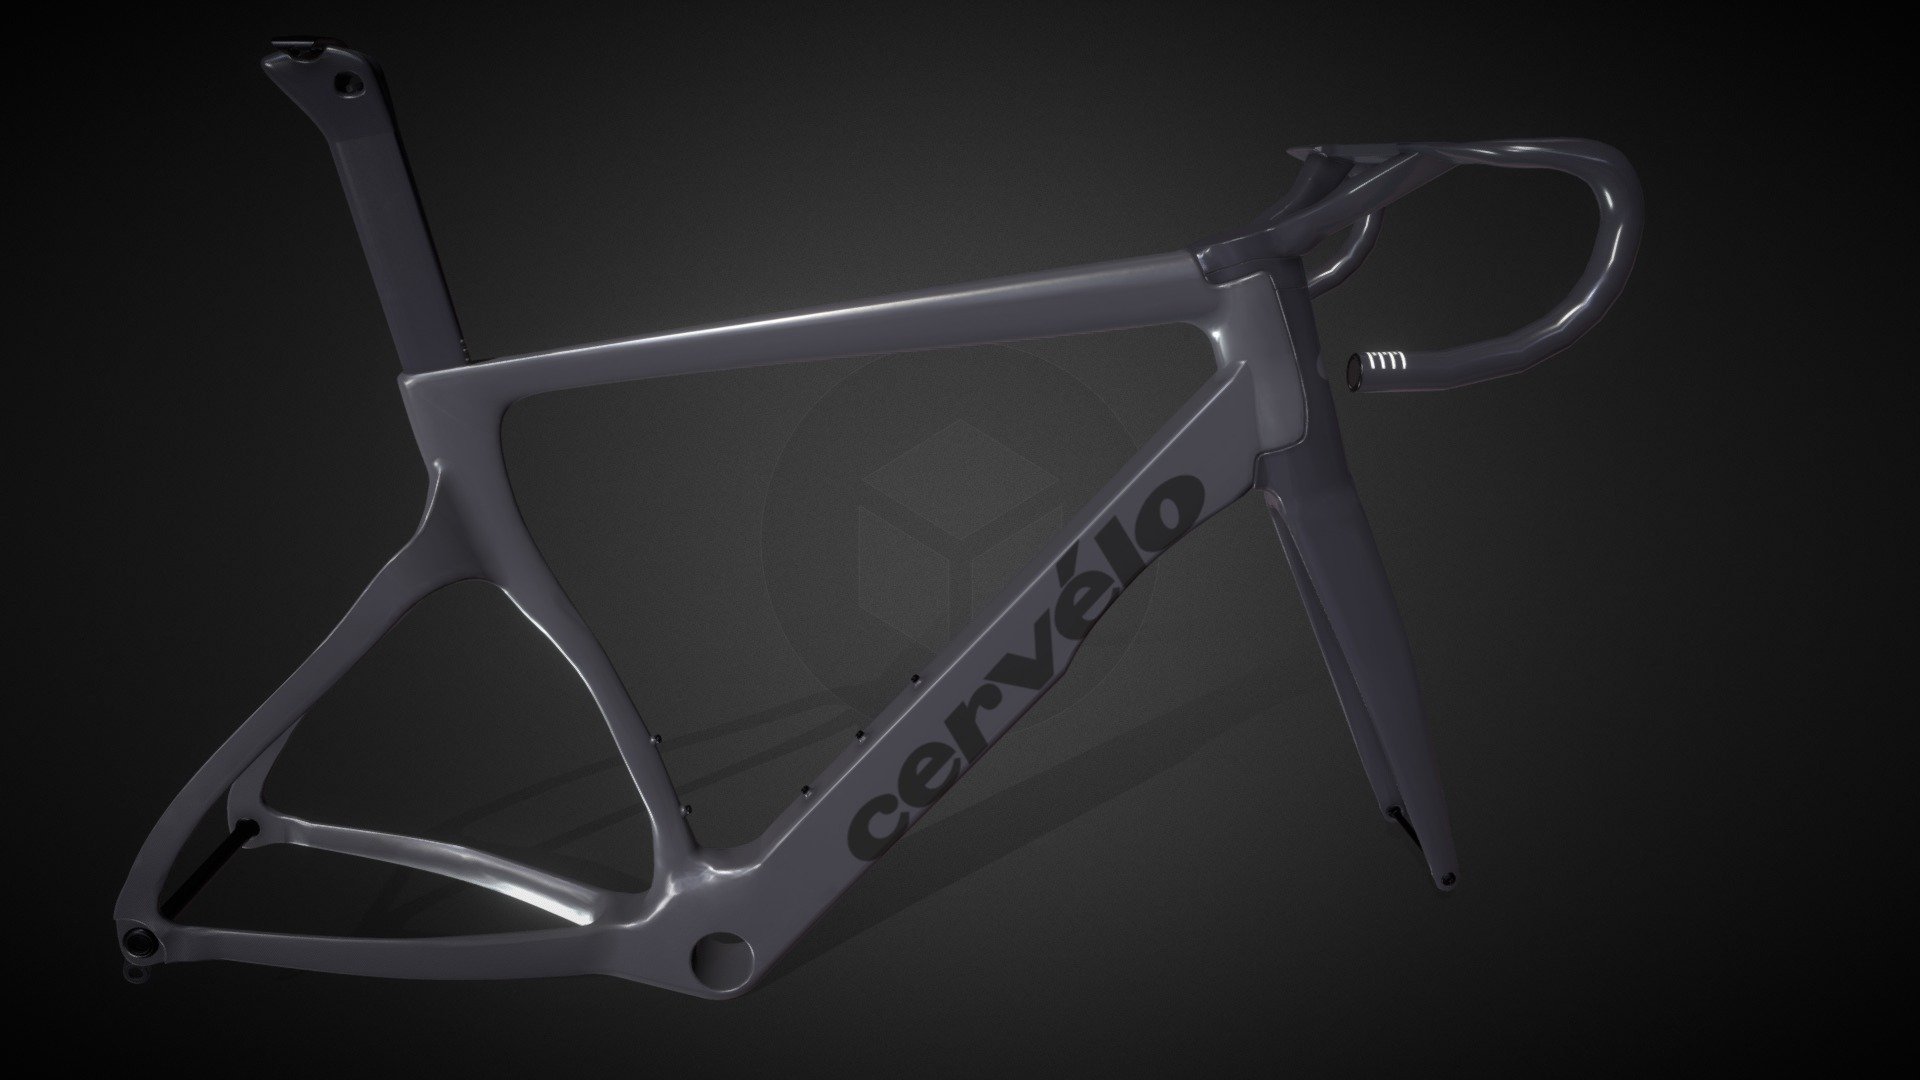 Cervelo S5 roadbike frameset made in Plasticity as a first steep learning curve object. Far from my previous projects polygonally modeled but nevertheless - it's fun to use #plasticity3d and more suitable from an engineering and design perspective I guess.
After making it it was unwrapped in RizomUV and blender then textured in substance painter to bo rendered in Blender (turntable EEVEE and statis renders cycles) 3d model